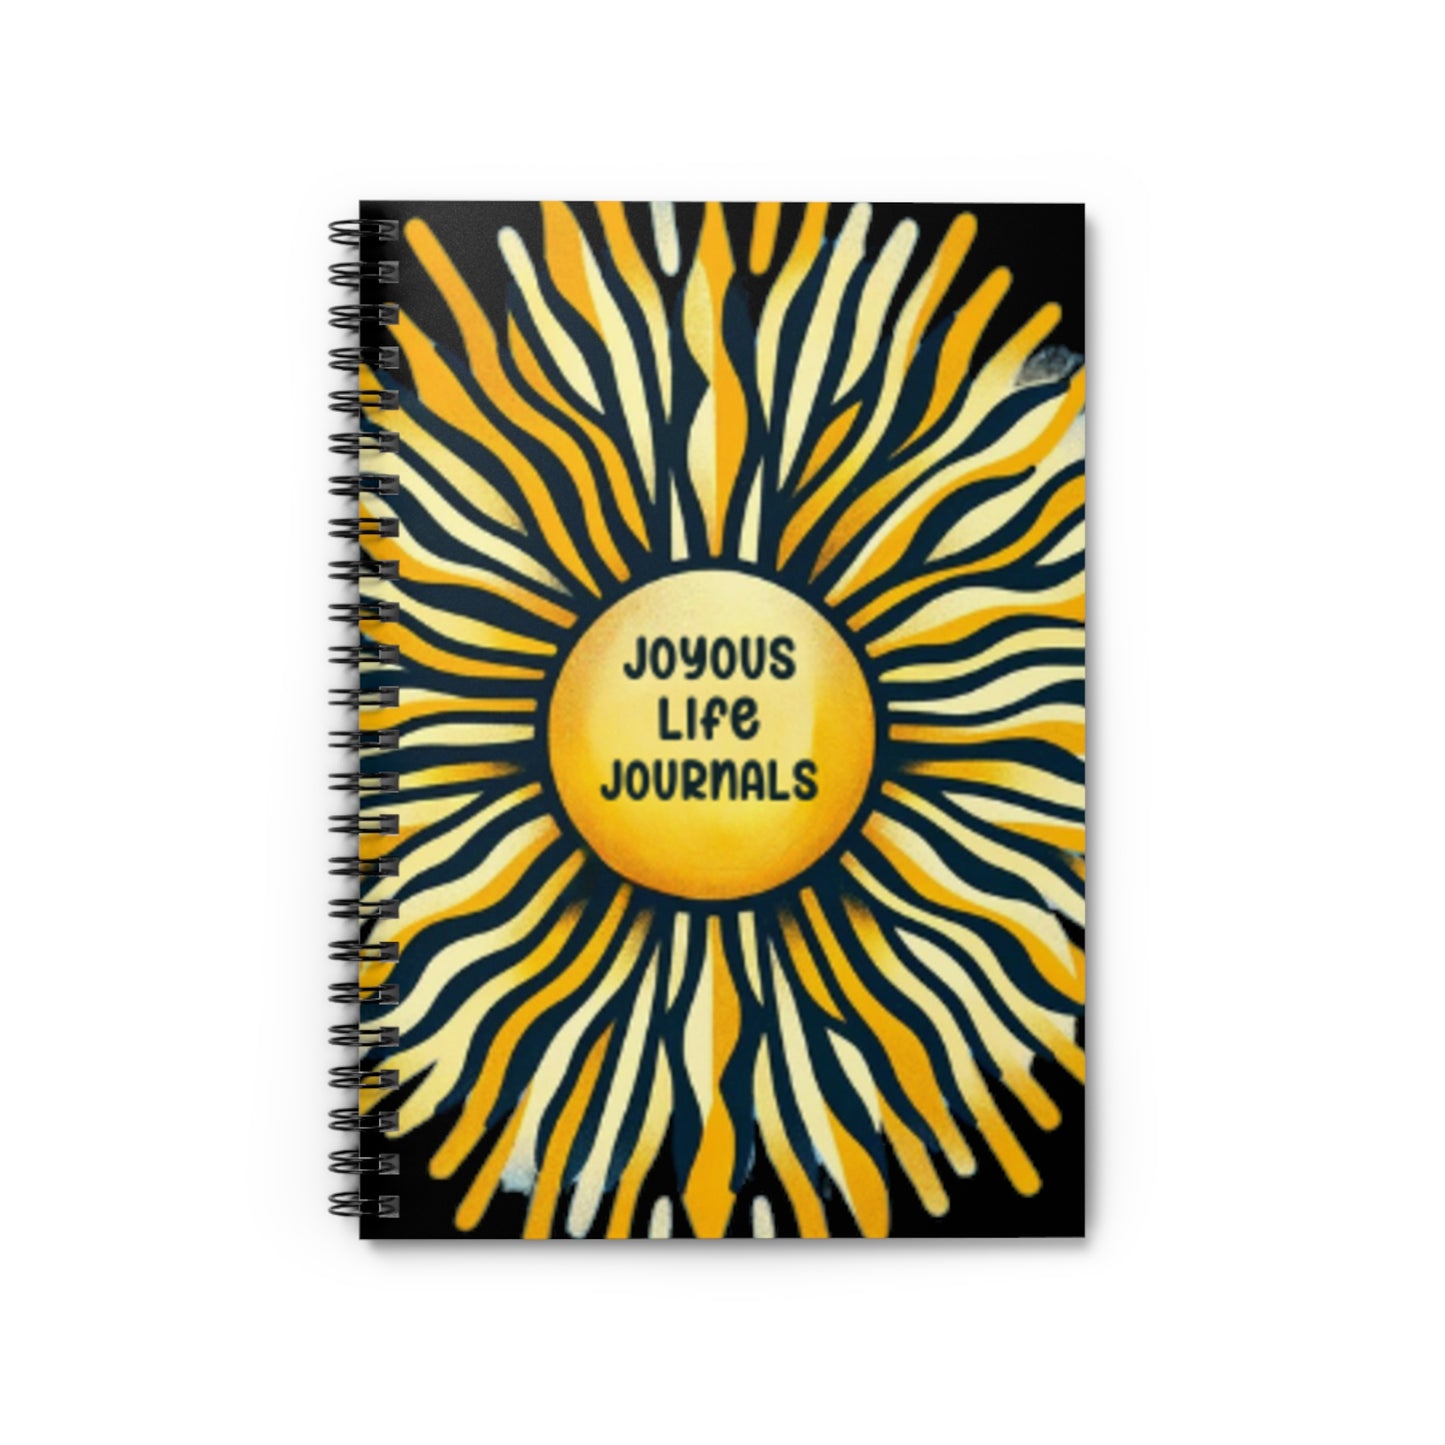 Radiant Moments Spiral Notebook - Ruled Line, Joyous Life Journals